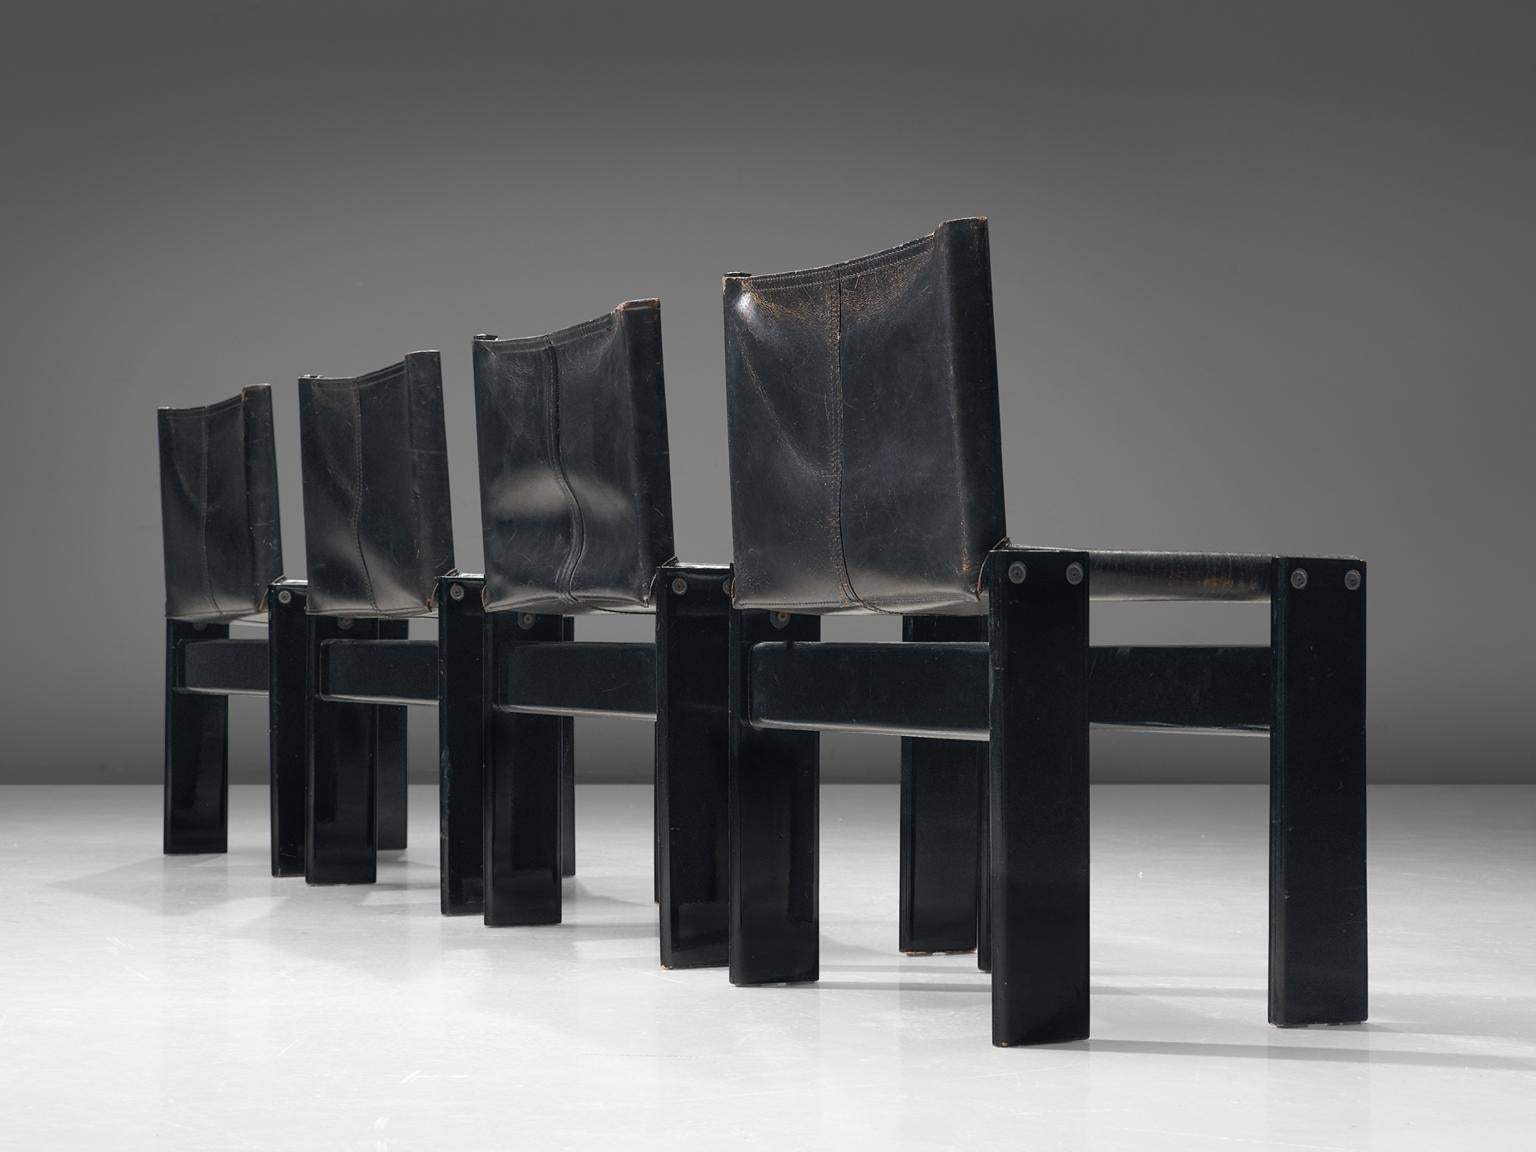 Afra & Tobia Scarpa for Molteni, Monk set of four dining chairs, black lacquered wood and black leather, Italy, 1974.

The wonderfully deep black leather is a wonderful combination with the black lacquered wood. Interesting is the 'flat' shape of